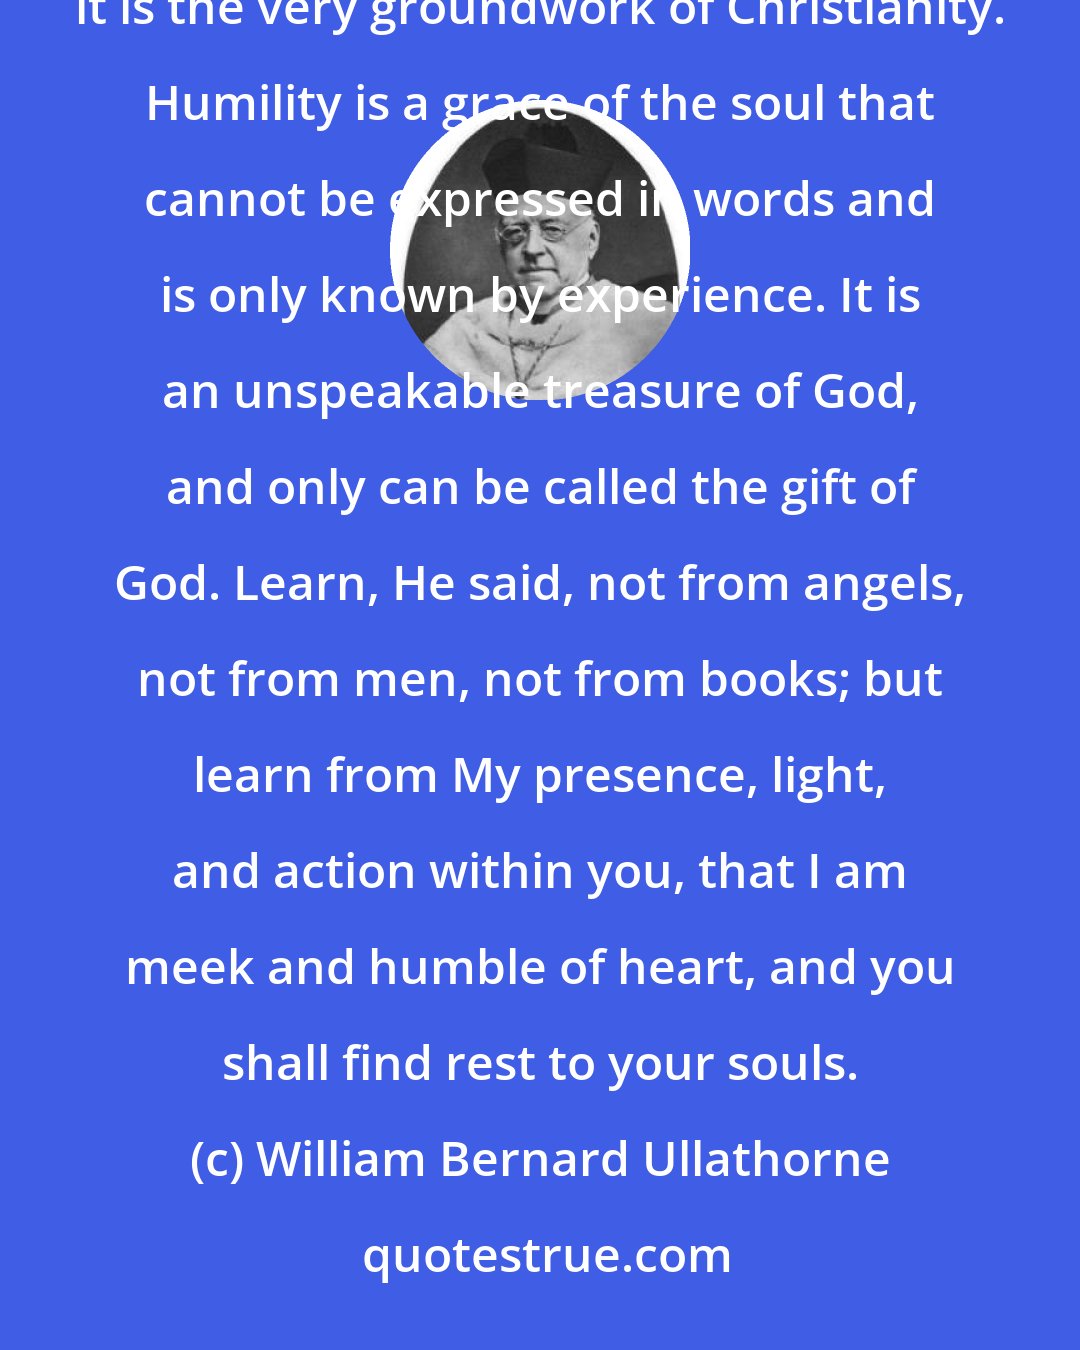 William Bernard Ullathorne: The least known among the virtues and also the most misunderstood is the virtue of humility. Yet, it is the very groundwork of Christianity. Humility is a grace of the soul that cannot be expressed in words and is only known by experience. It is an unspeakable treasure of God, and only can be called the gift of God. Learn, He said, not from angels, not from men, not from books; but learn from My presence, light, and action within you, that I am meek and humble of heart, and you shall find rest to your souls.